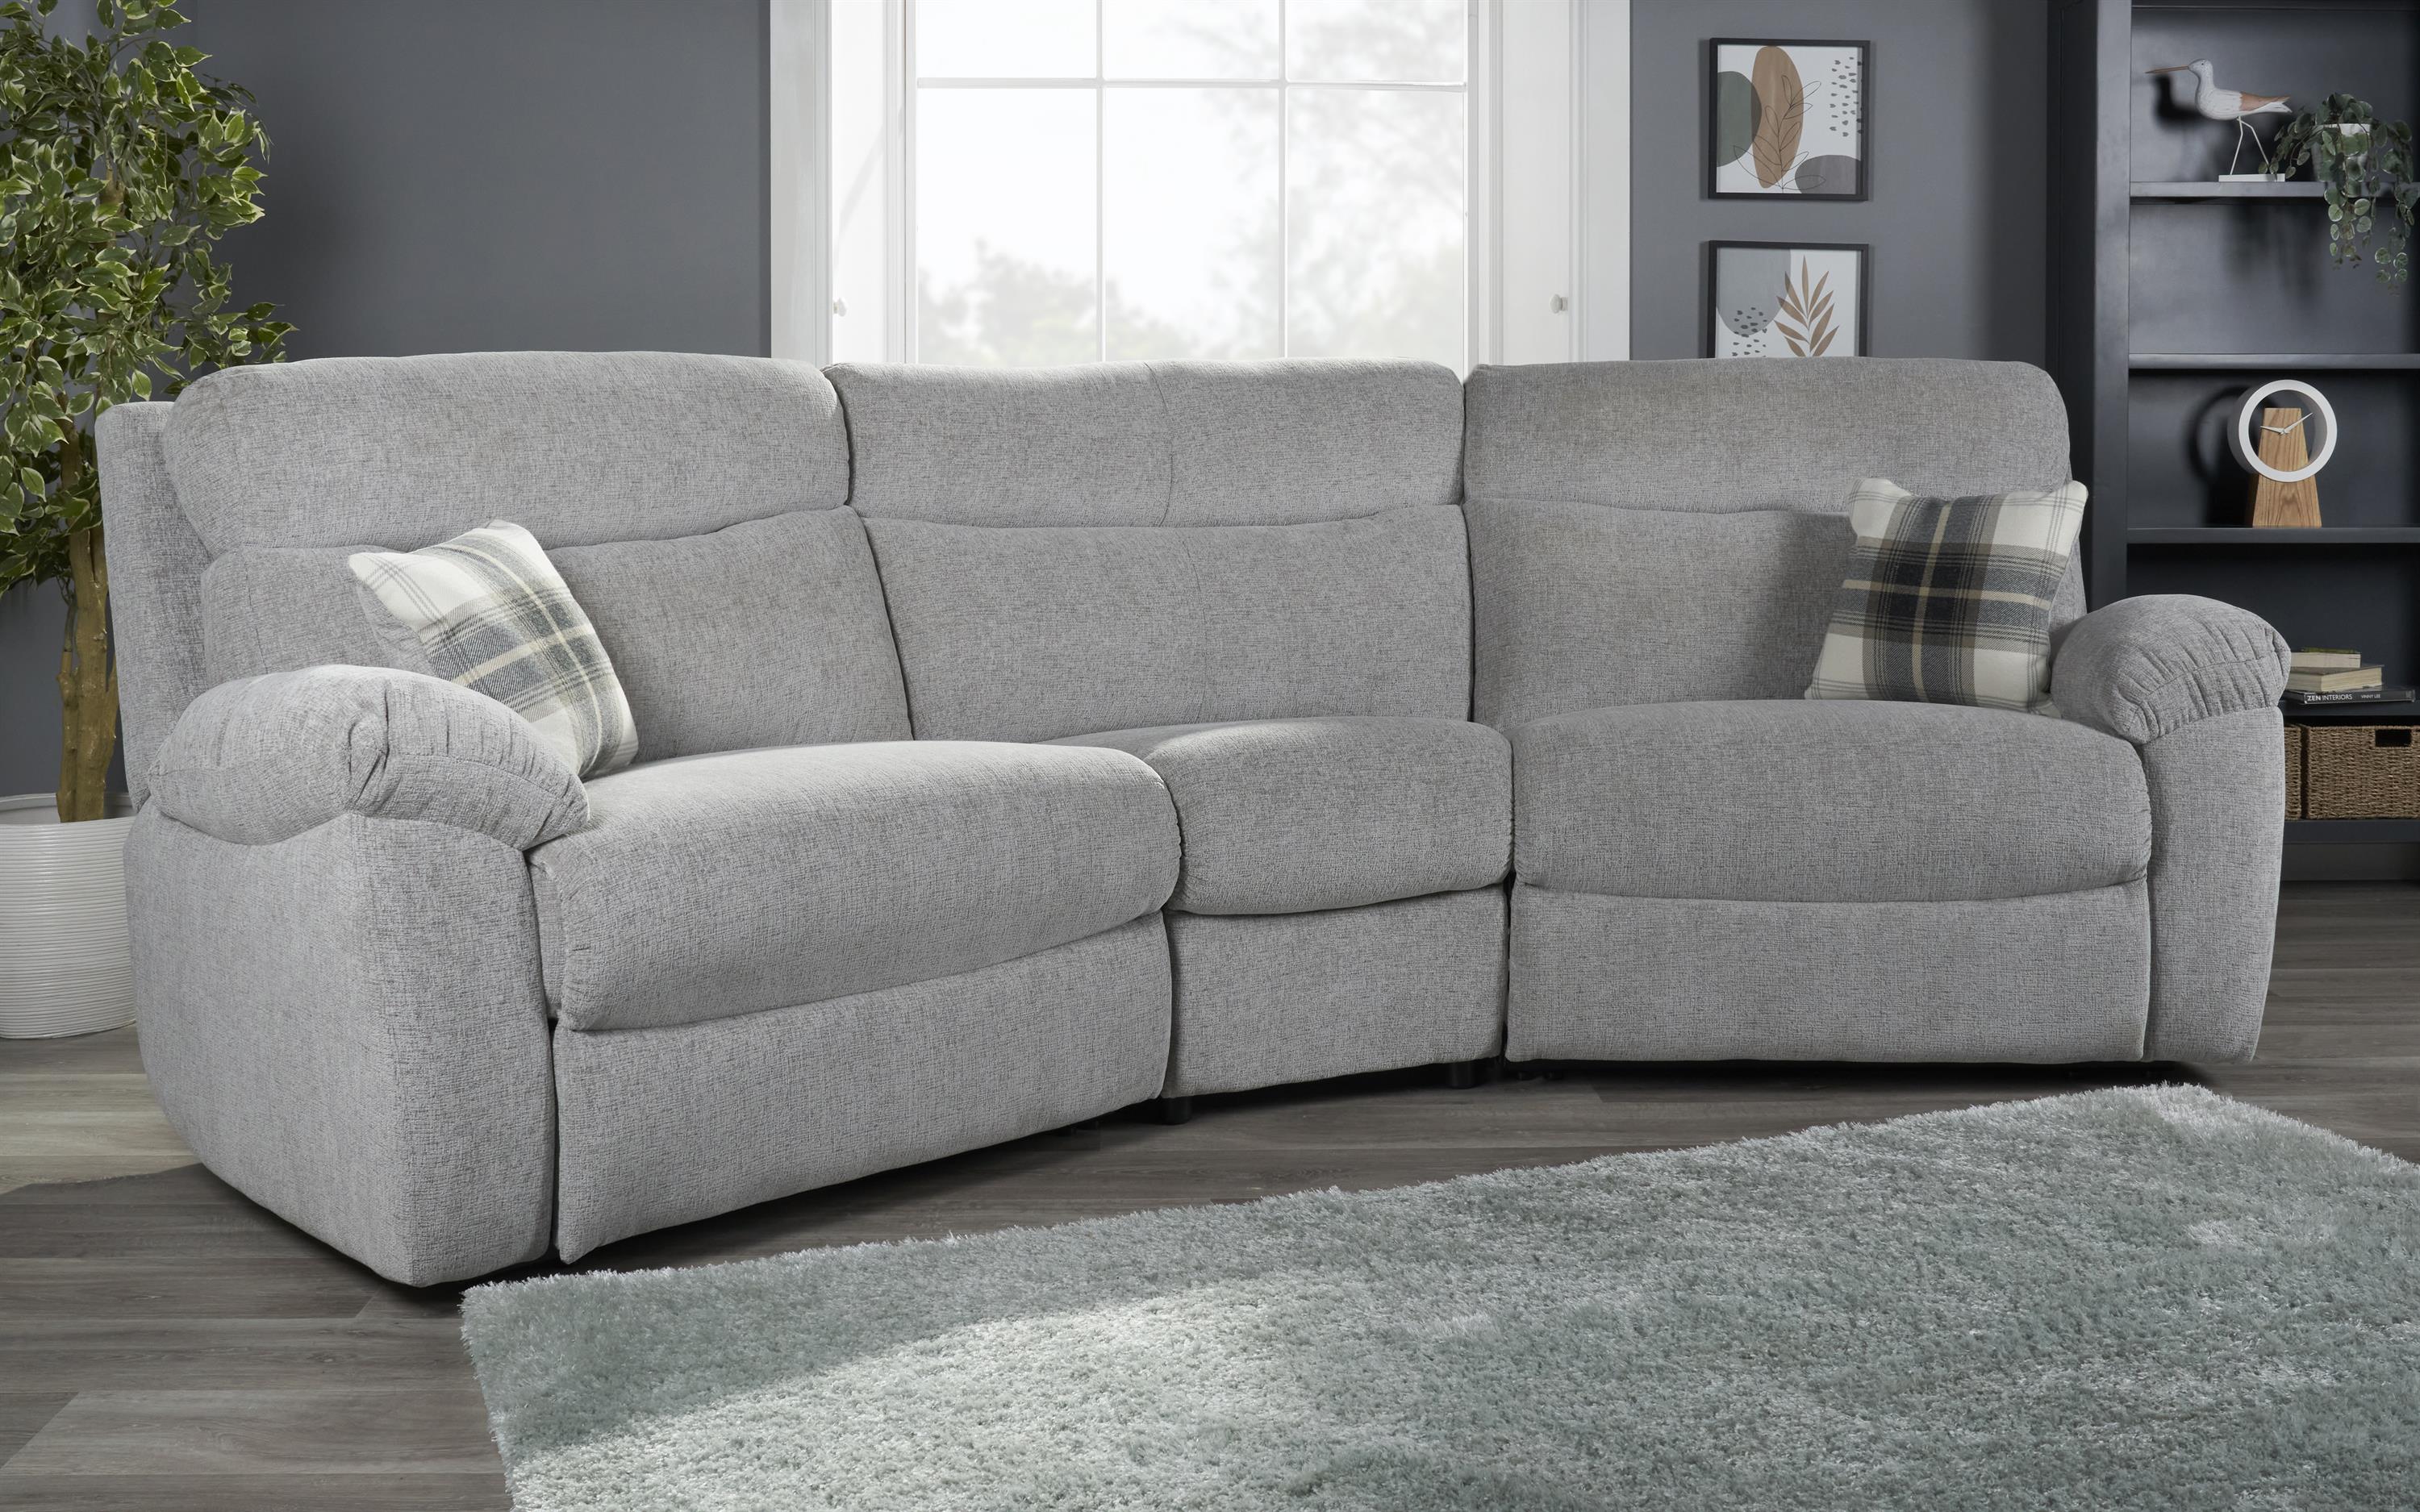 Cloud 4 Seater Curved Static Sofa | Free Download Nude Photo Gallery